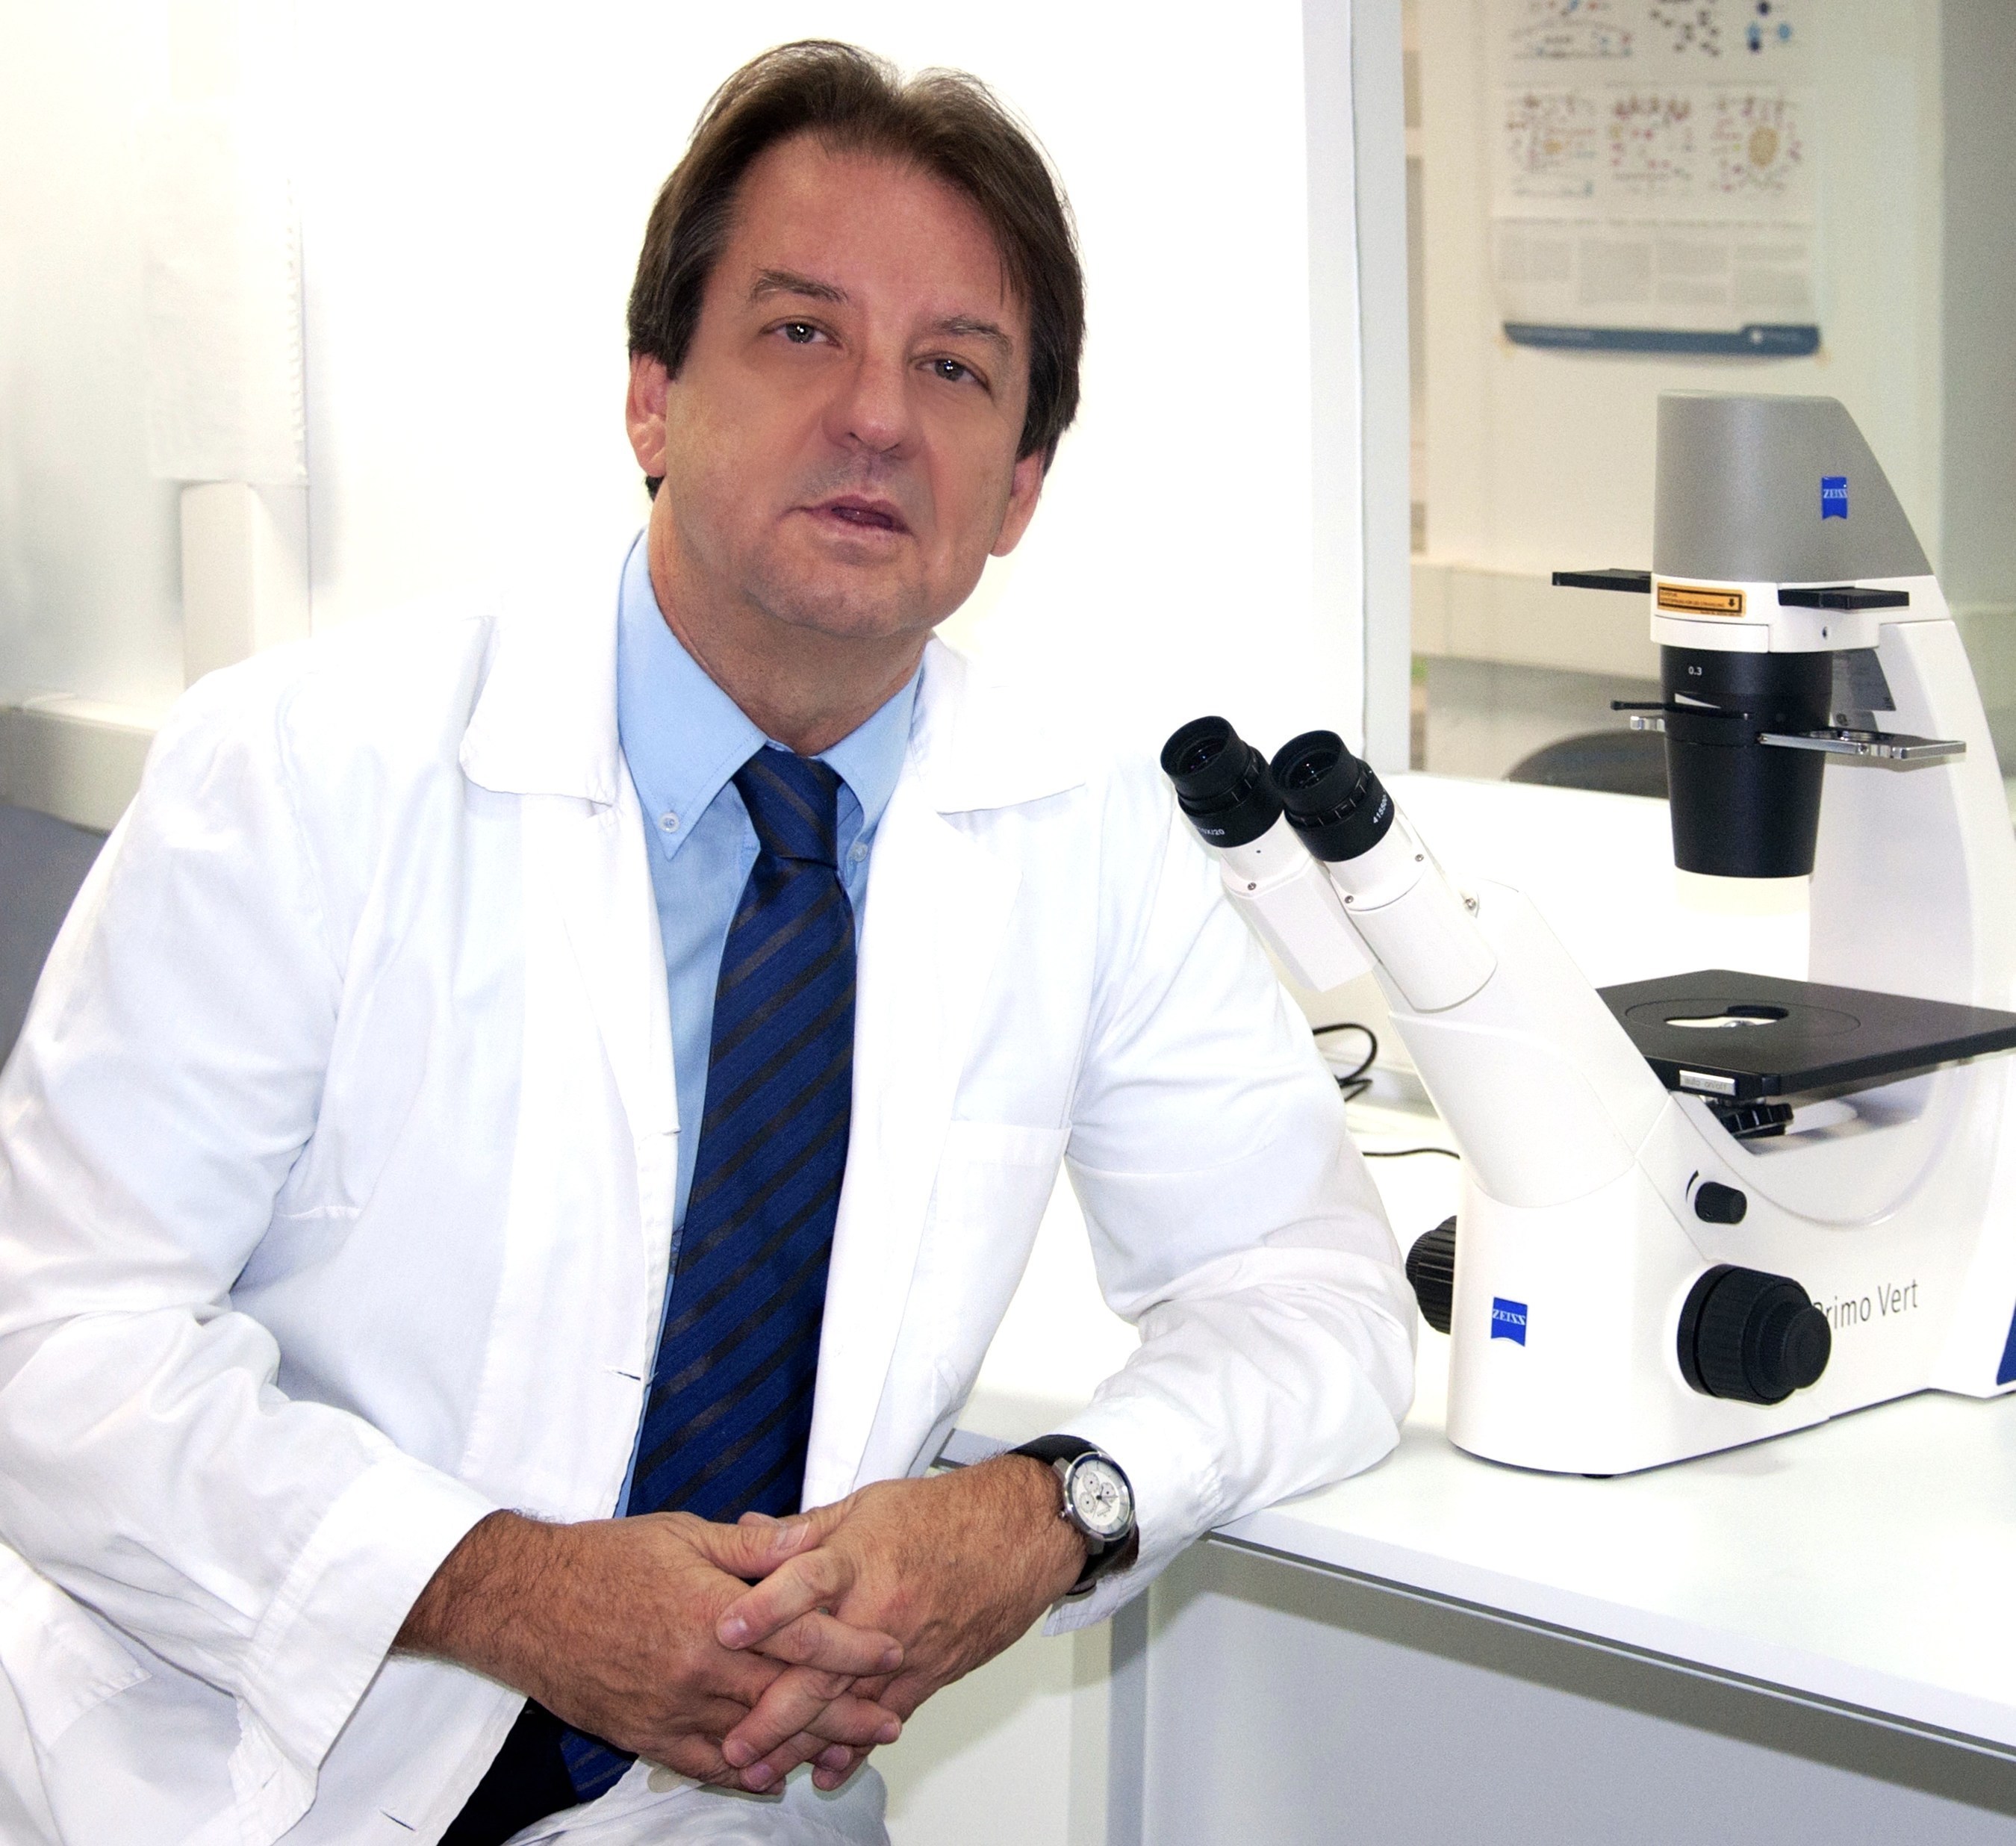 Dr. Achilleas Gravanis, Professor of Pharmacology at University of Crete. Developer of MicroNeurotrophins, a new medication to treat ALS. ALS Worldwide is leading a crowdfunding campaign on Indiegogo.com to bring the promising drug to a Phase 1 Clinical Trial.